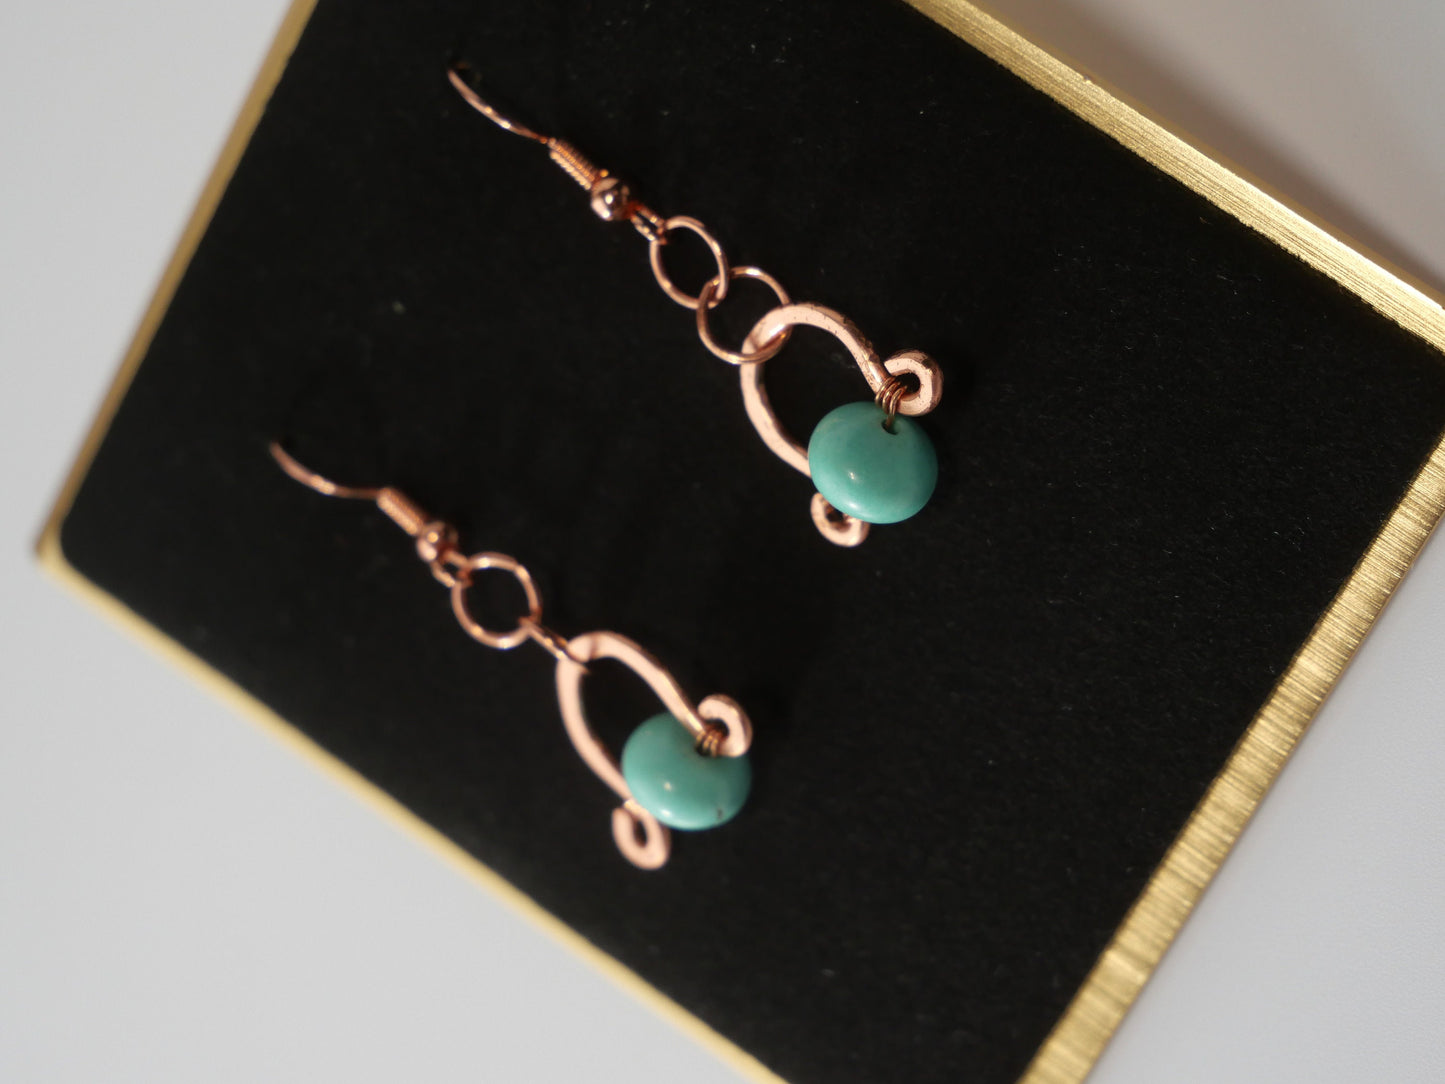 Copper and Turquoise bead earrings, Simple Copper Earrings, Hand Made Earrings. Made in Maine